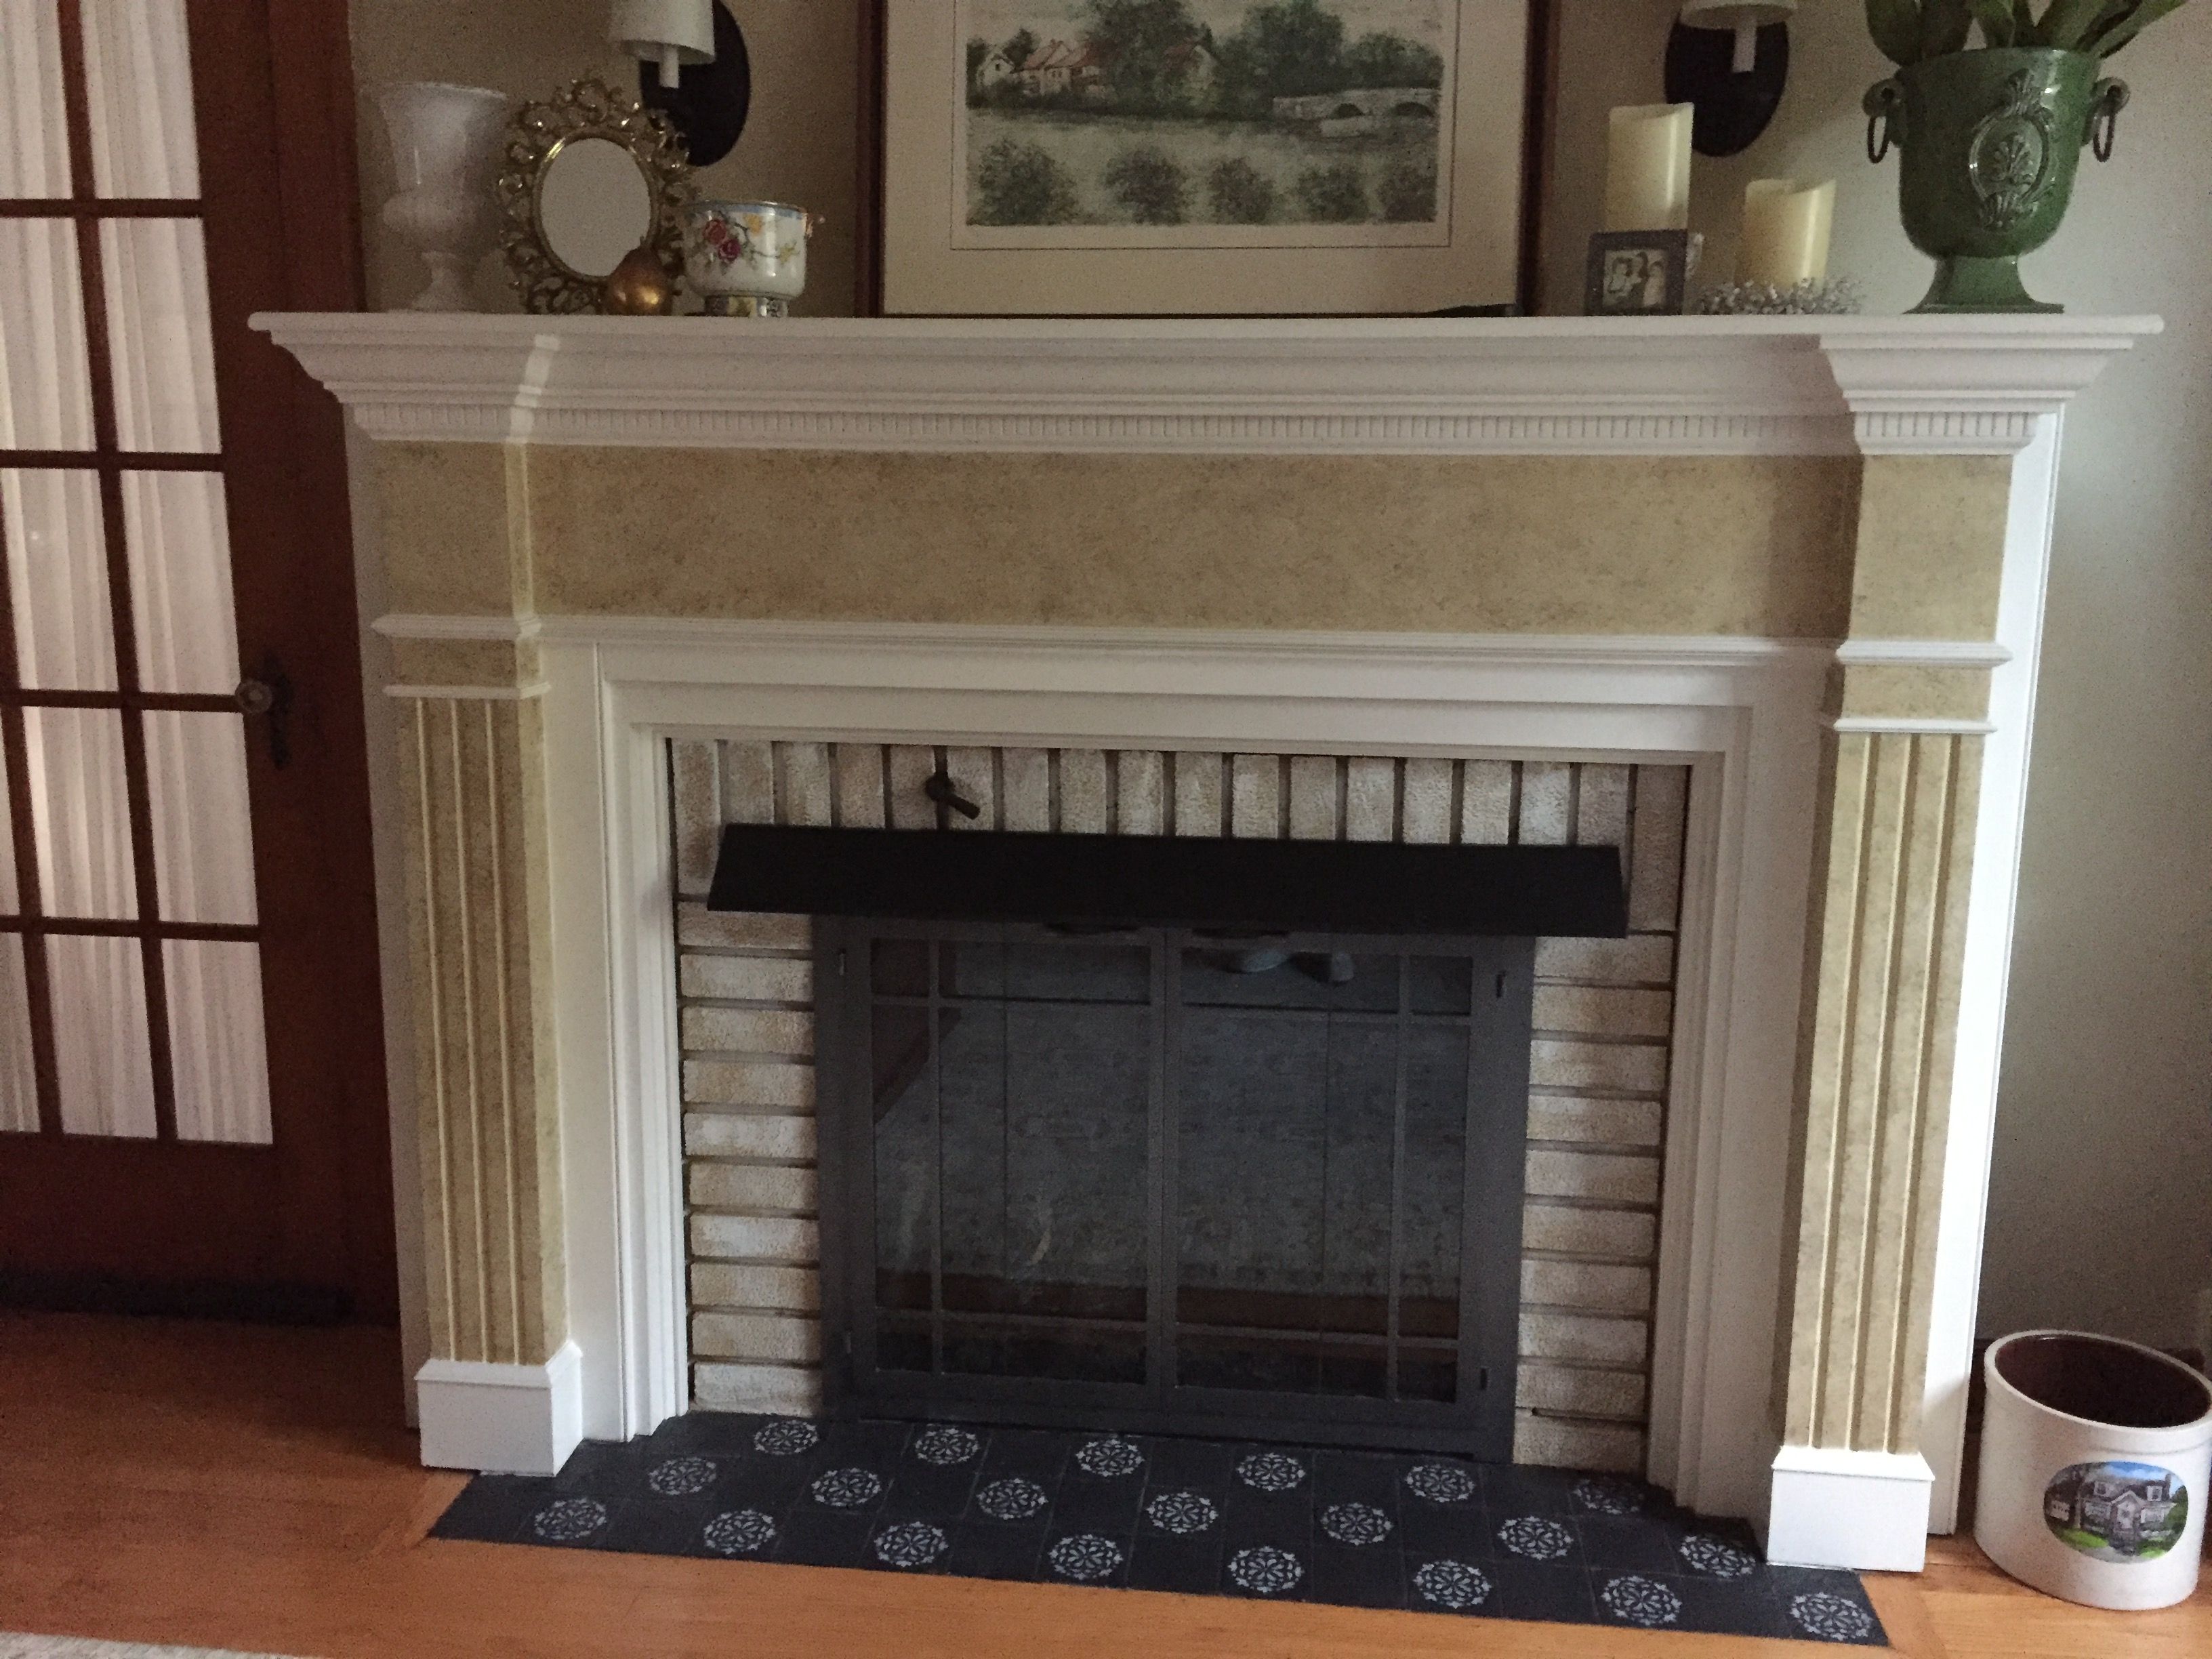 How to Put Out A Fireplace Fire Fresh Stencil Over Black Tile Just to Jazz Up the Fireplace